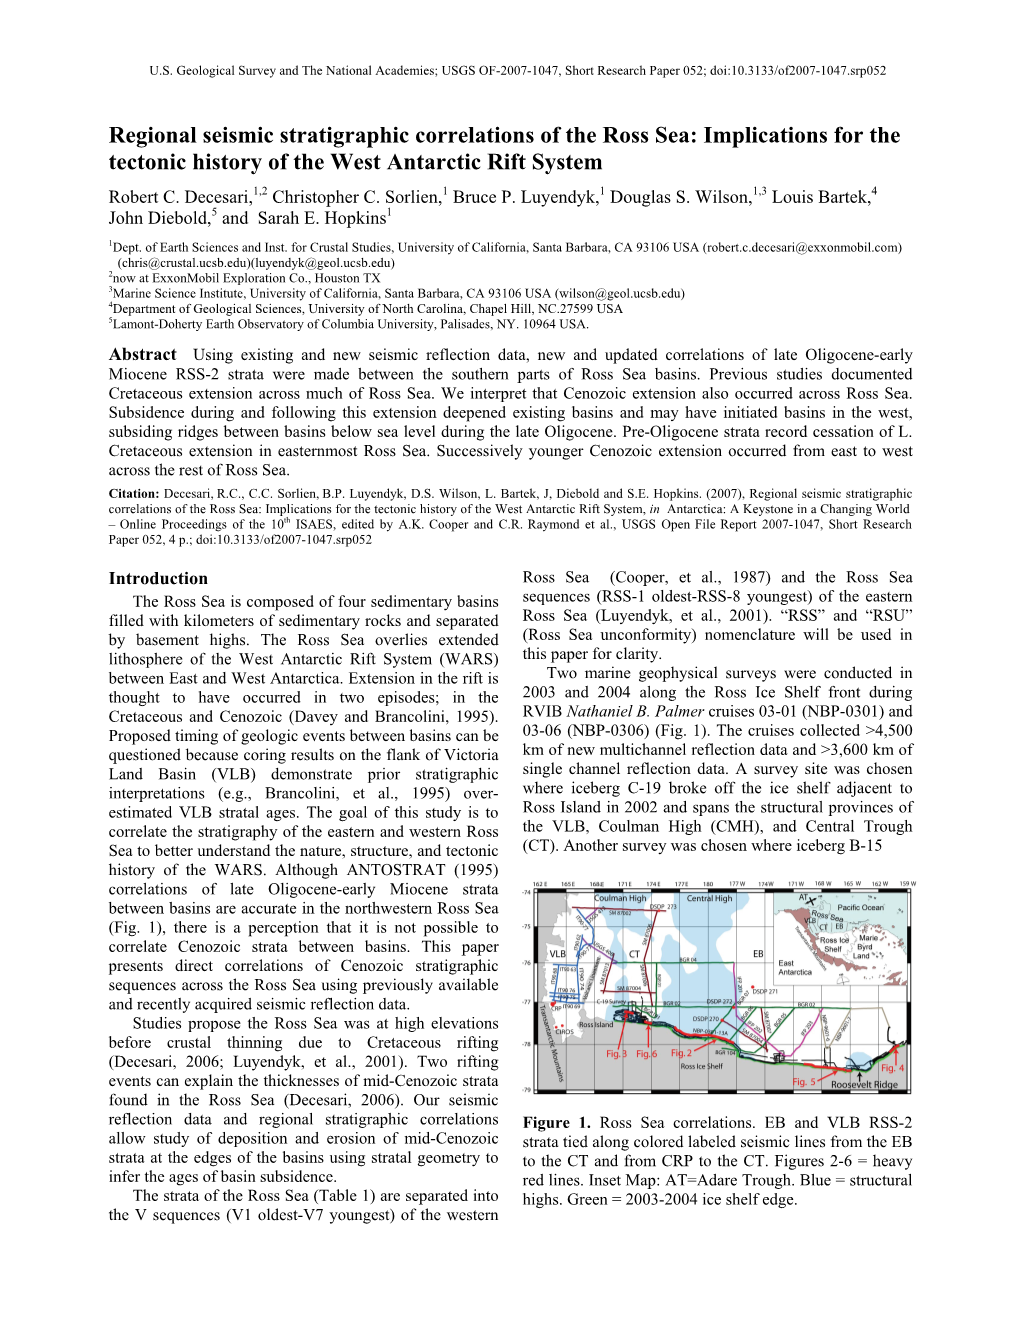 USGS Open-File Report 2007-1047, Short Research Paper